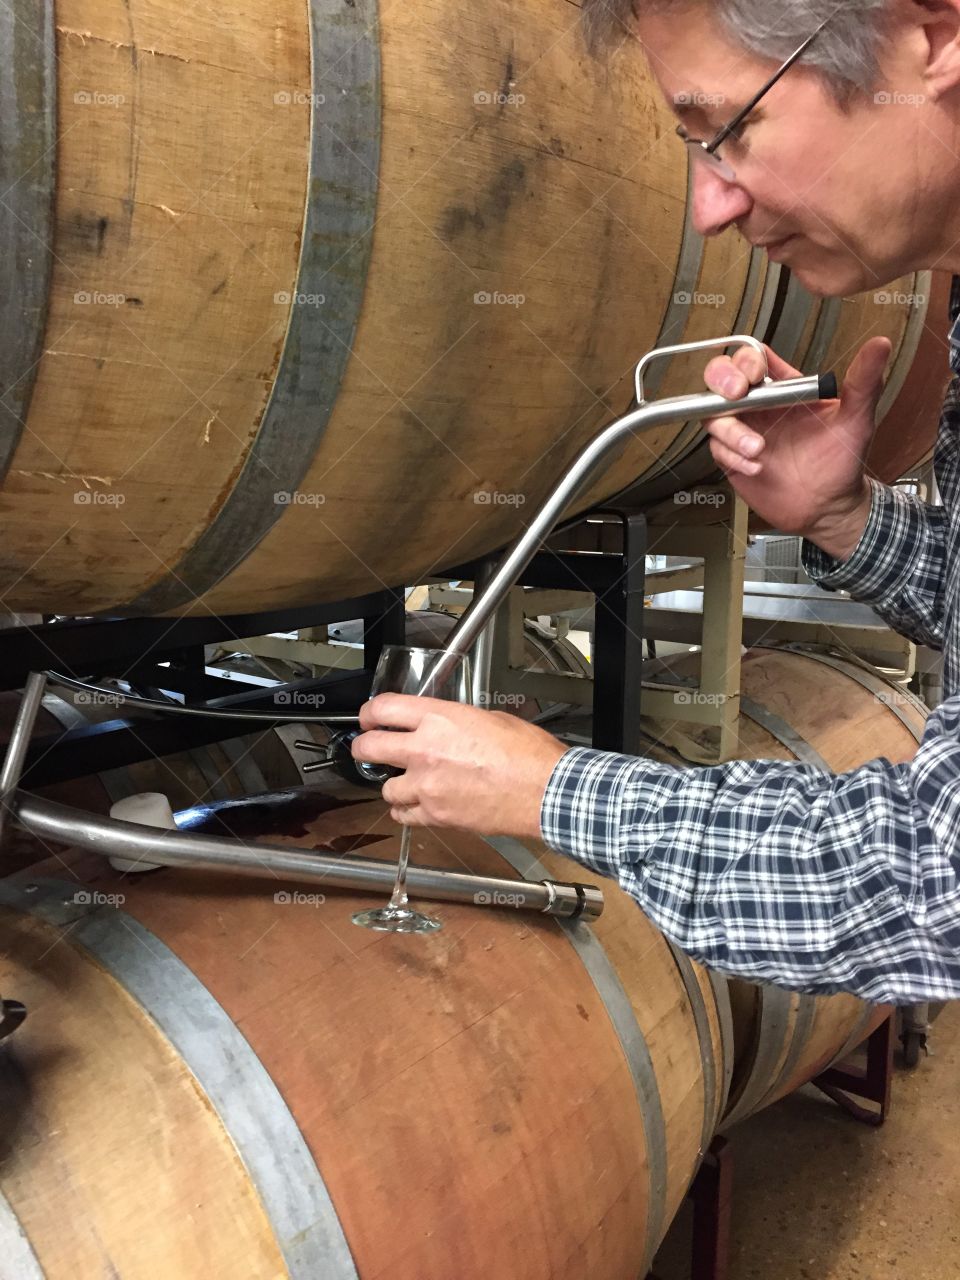 Barrel tasting.  Winemaker uses a thieve to extract wine from an oak barrel to sample